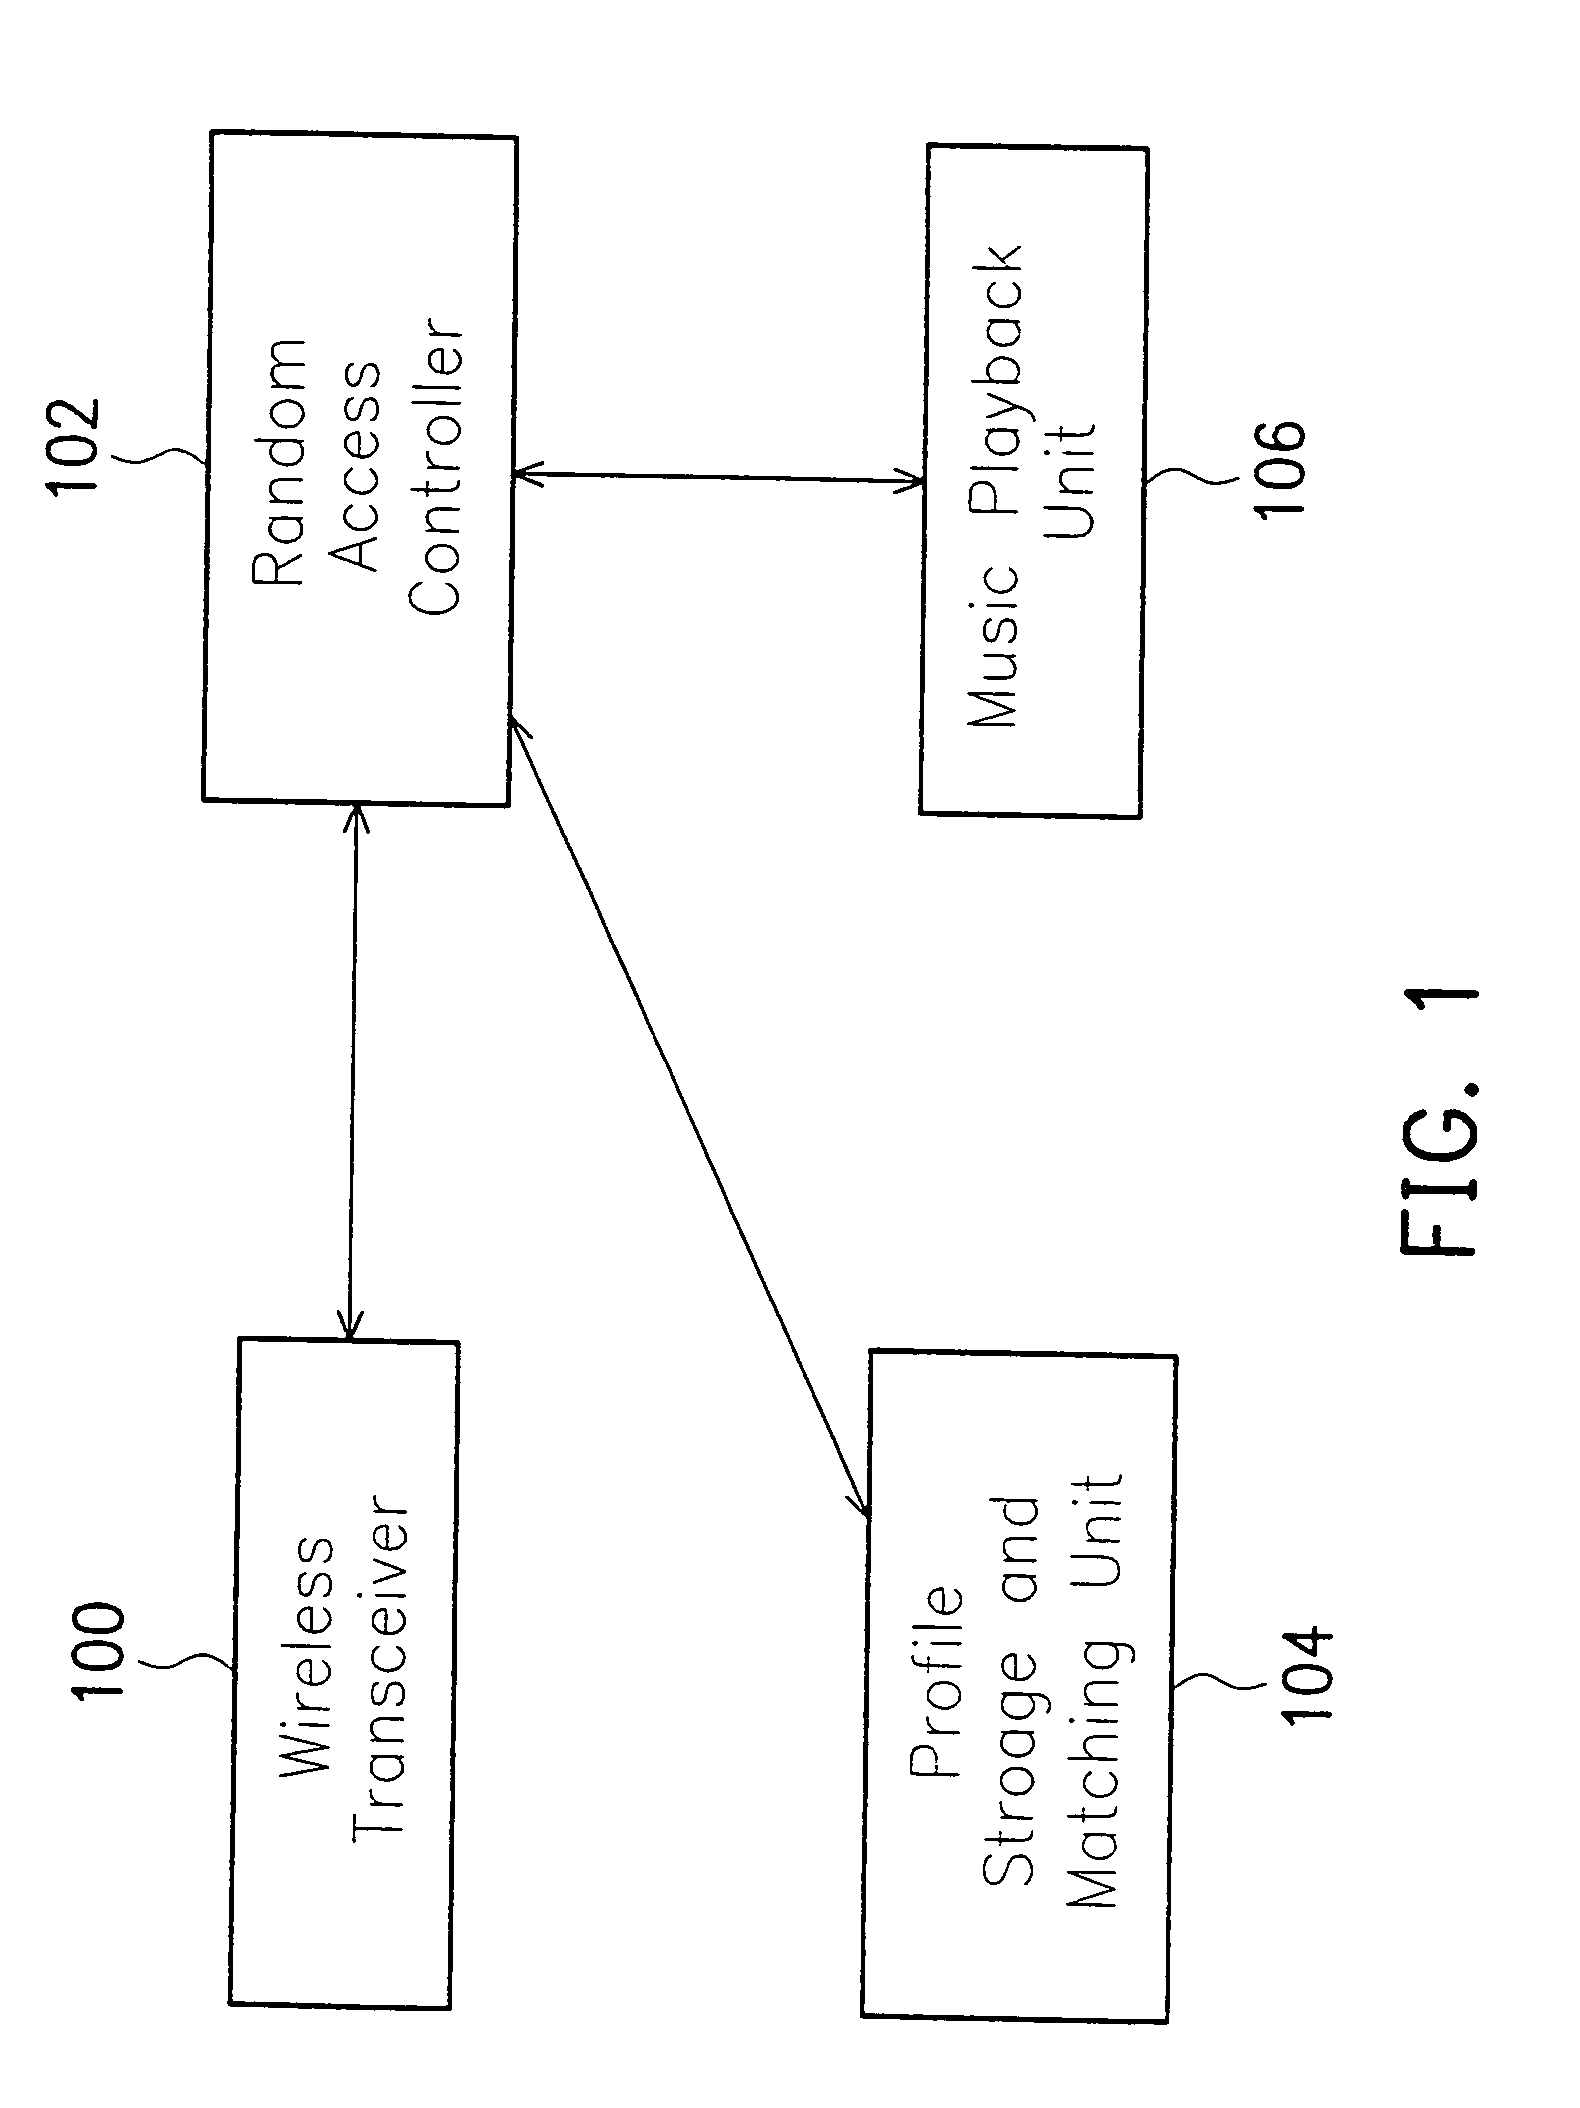 Apparatus and method for coordinated music playback in wireless ad-hoc networks